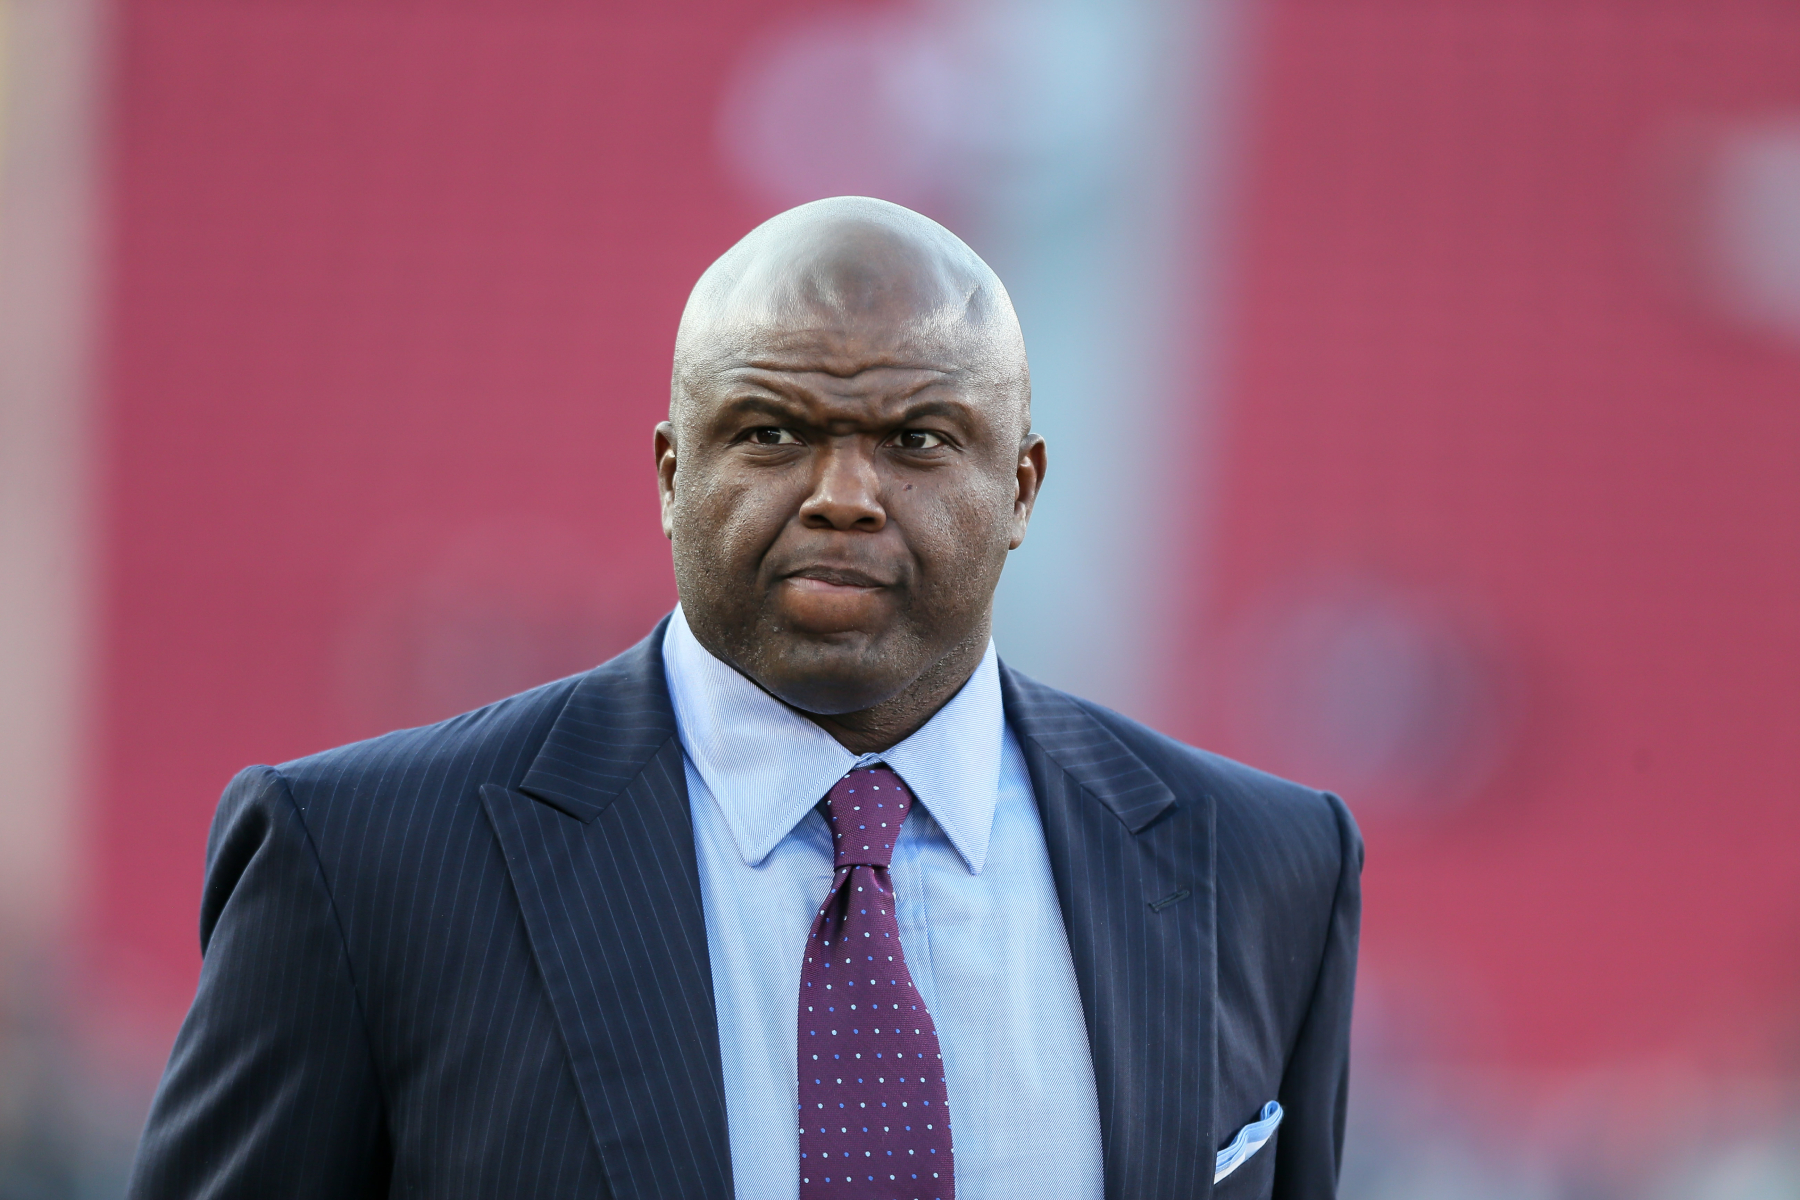 The entire college football season is on the brink of getting canceled. However, ESPN's Booger McFarland gave his solution for it.